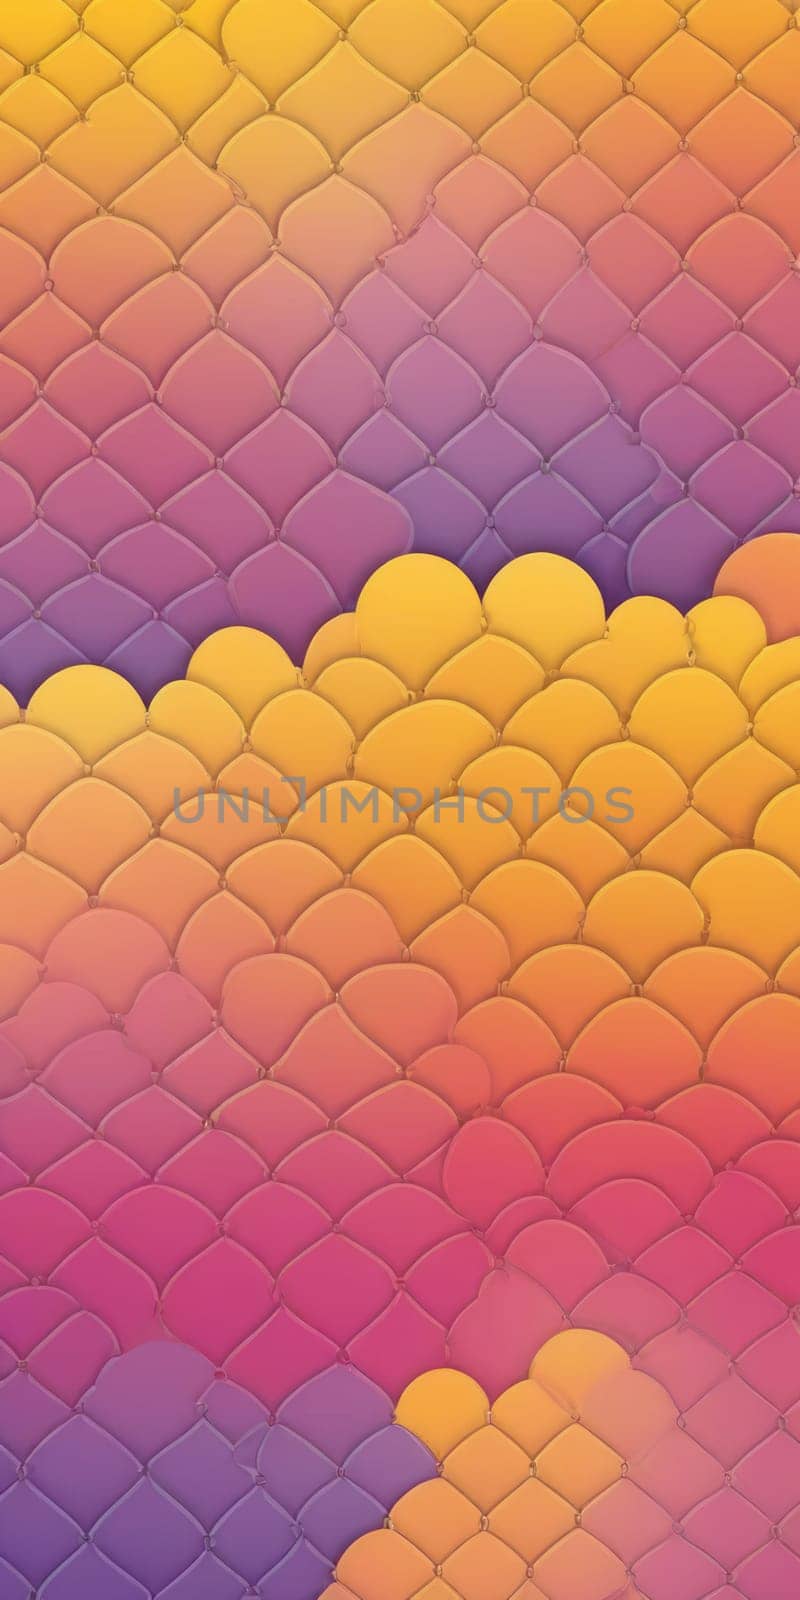 Quatrefoil Shapes in Yellow Lavenderblush by nkotlyar